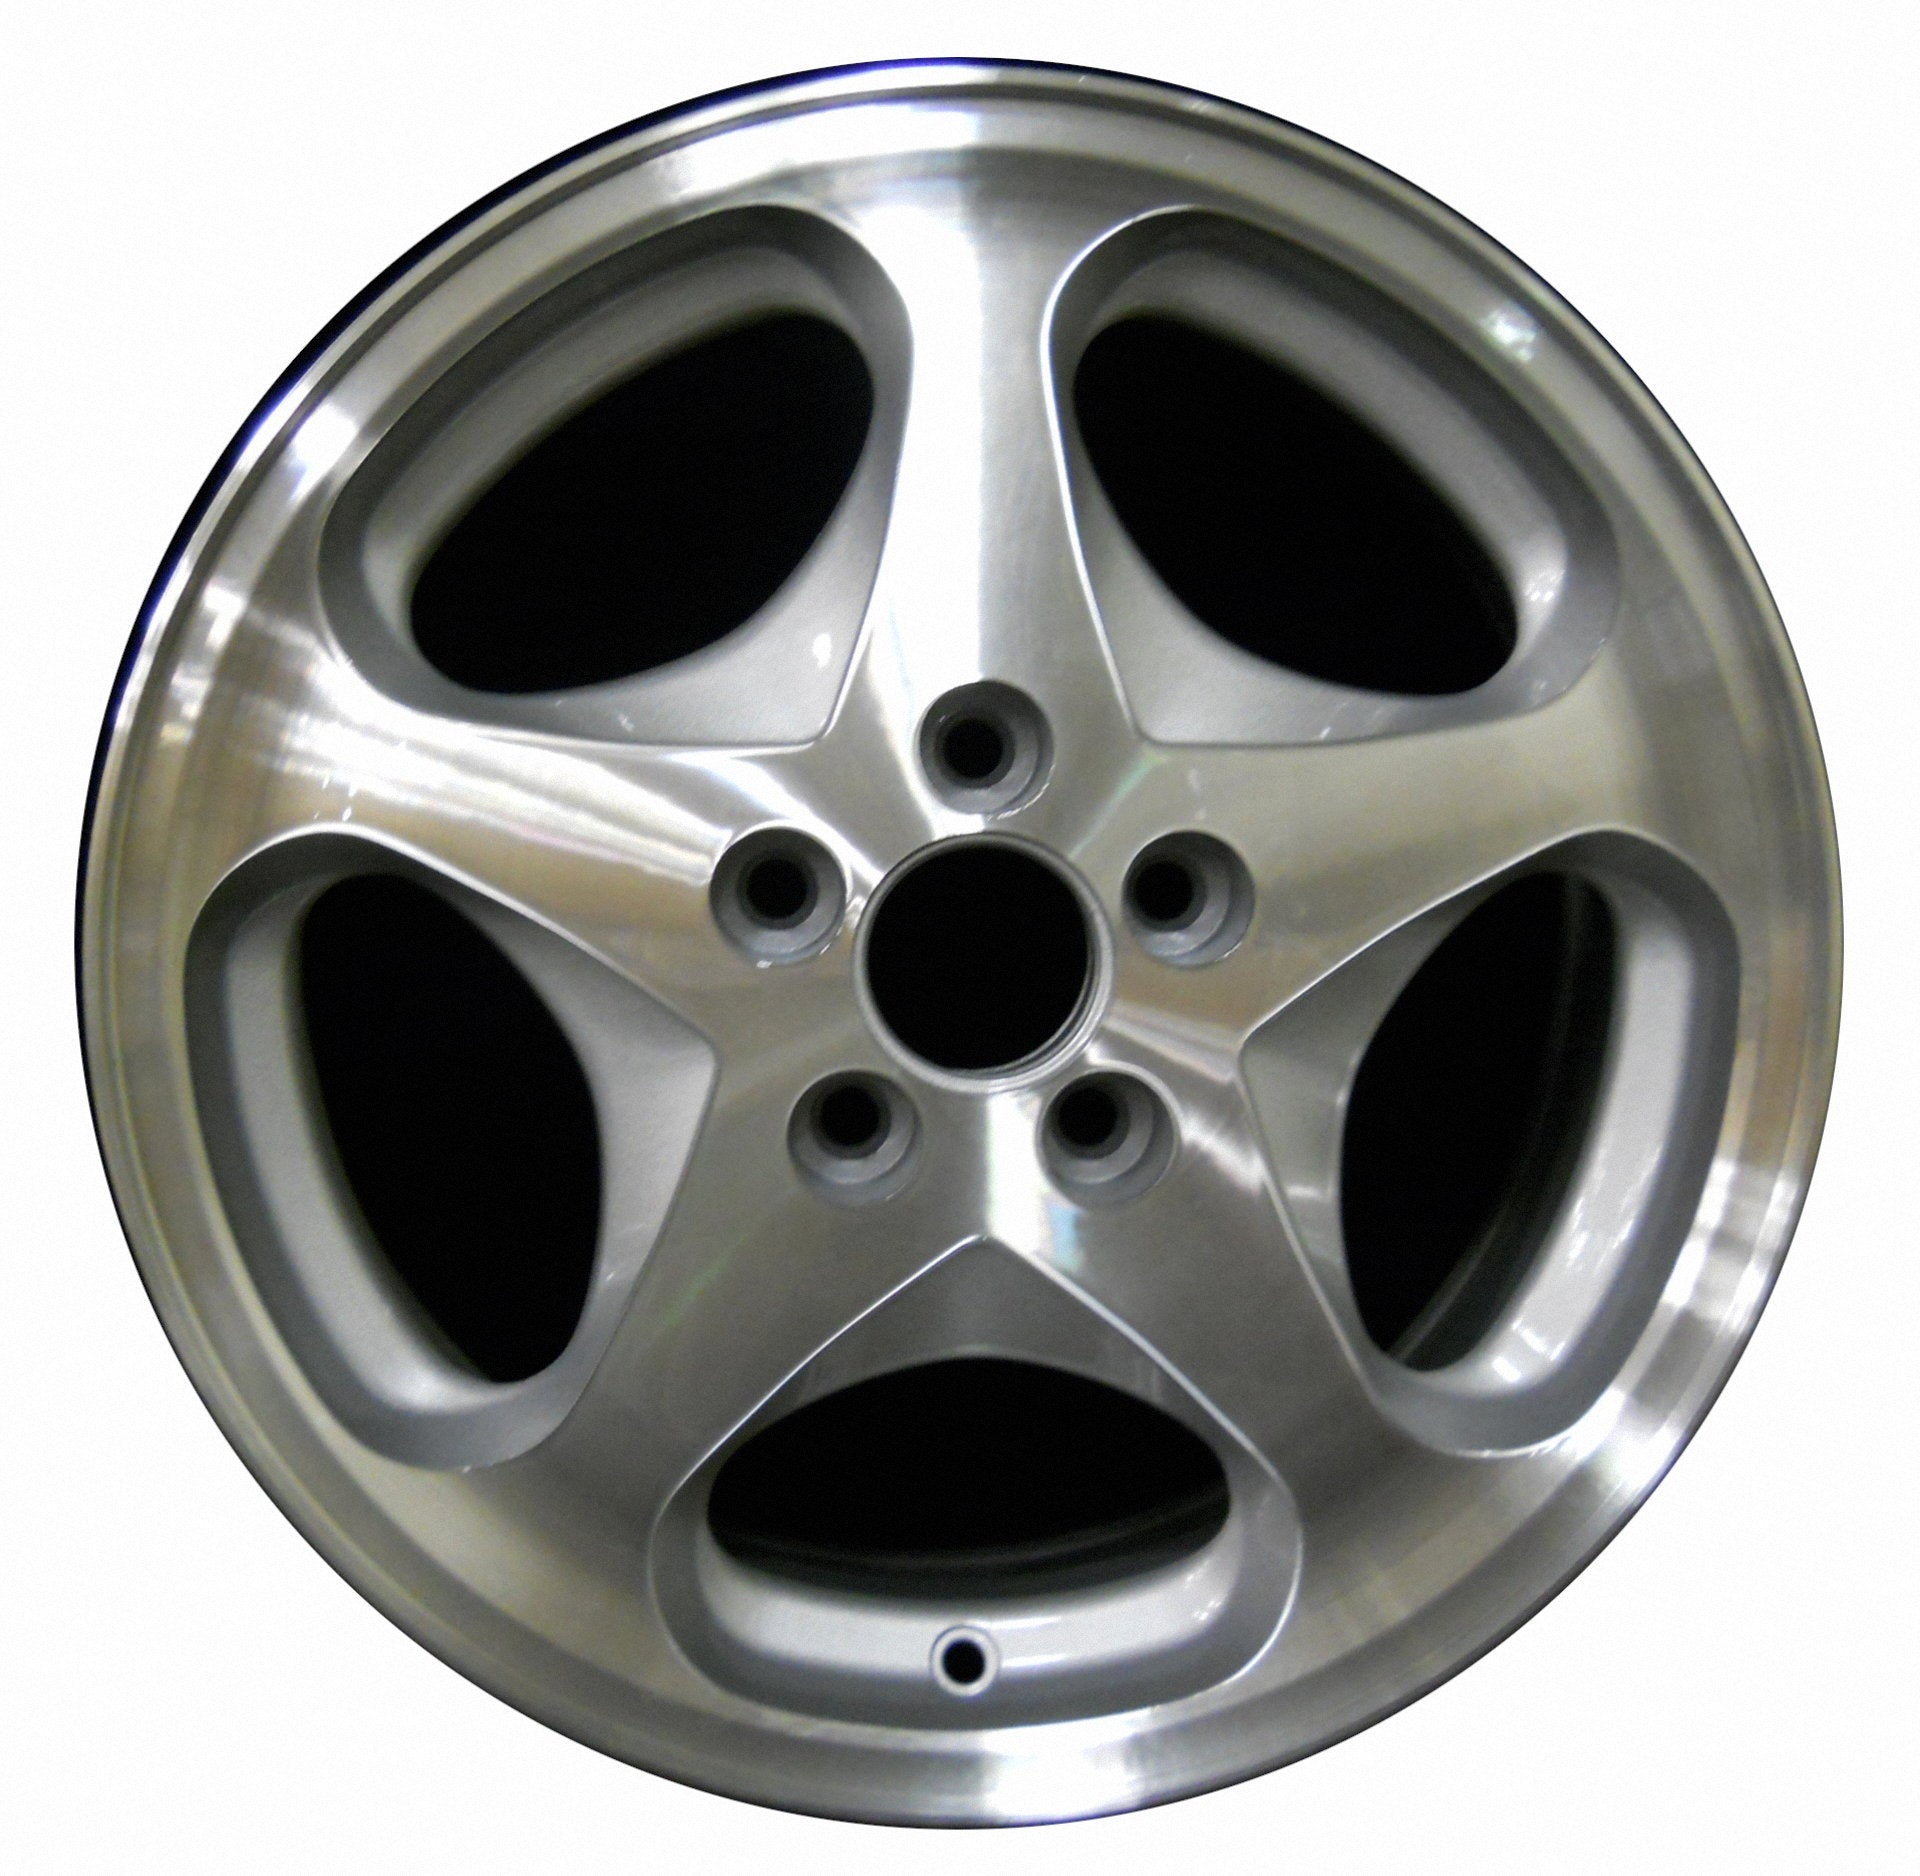 Ford Taurus  1999, 2000, 2001, 2002, 2003 Factory OEM Car Wheel Size 16x6.5 Alloy WAO.3313.PS02.MA